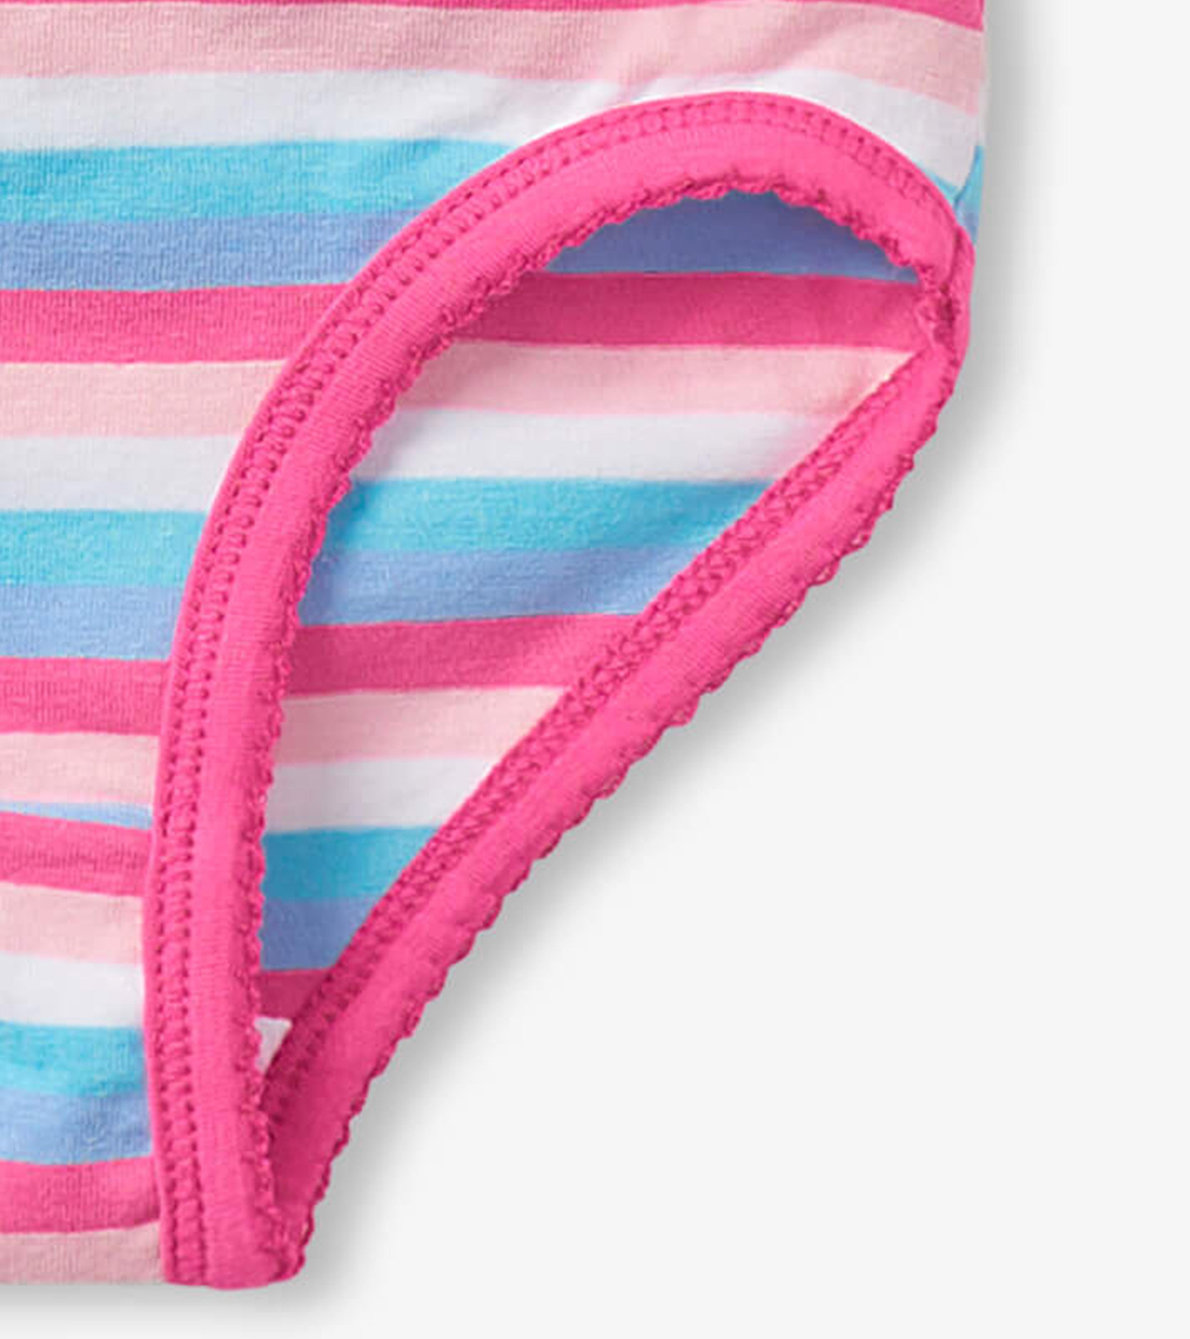 View larger image of Stripes Girls Brief Underwear 3 Pack